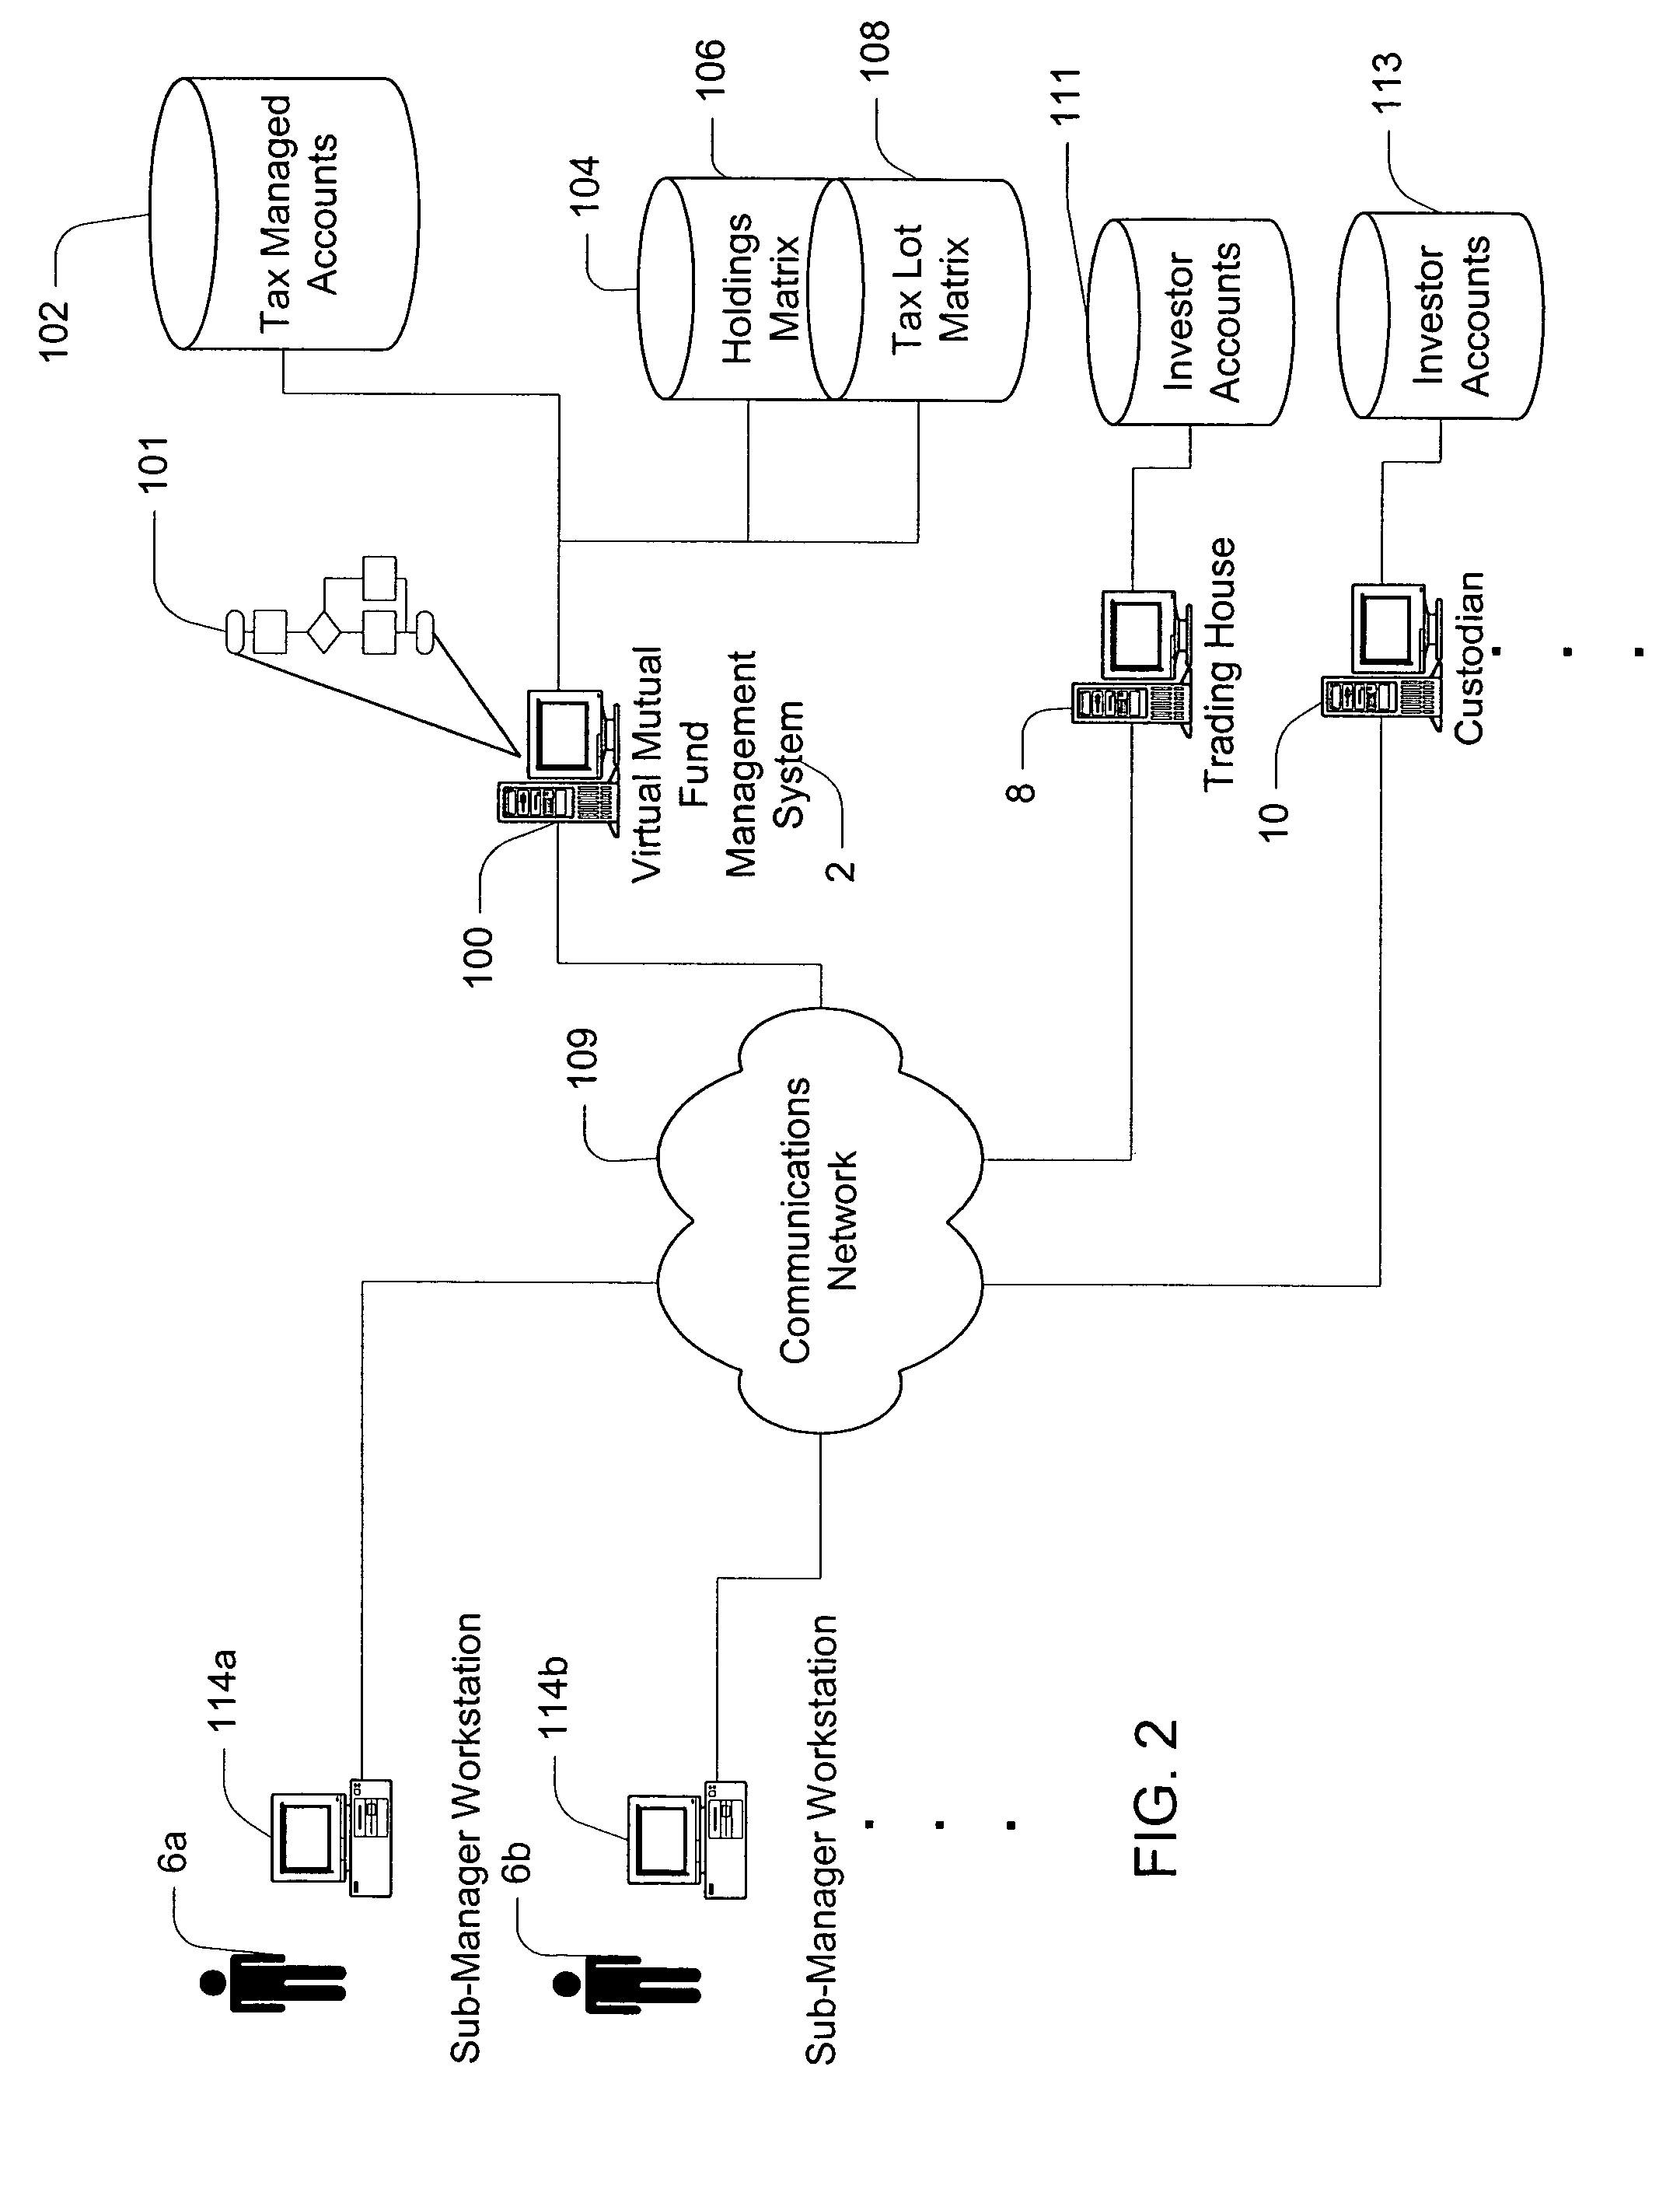 Method and apparatus for managing a virtual portfolio of investment objects